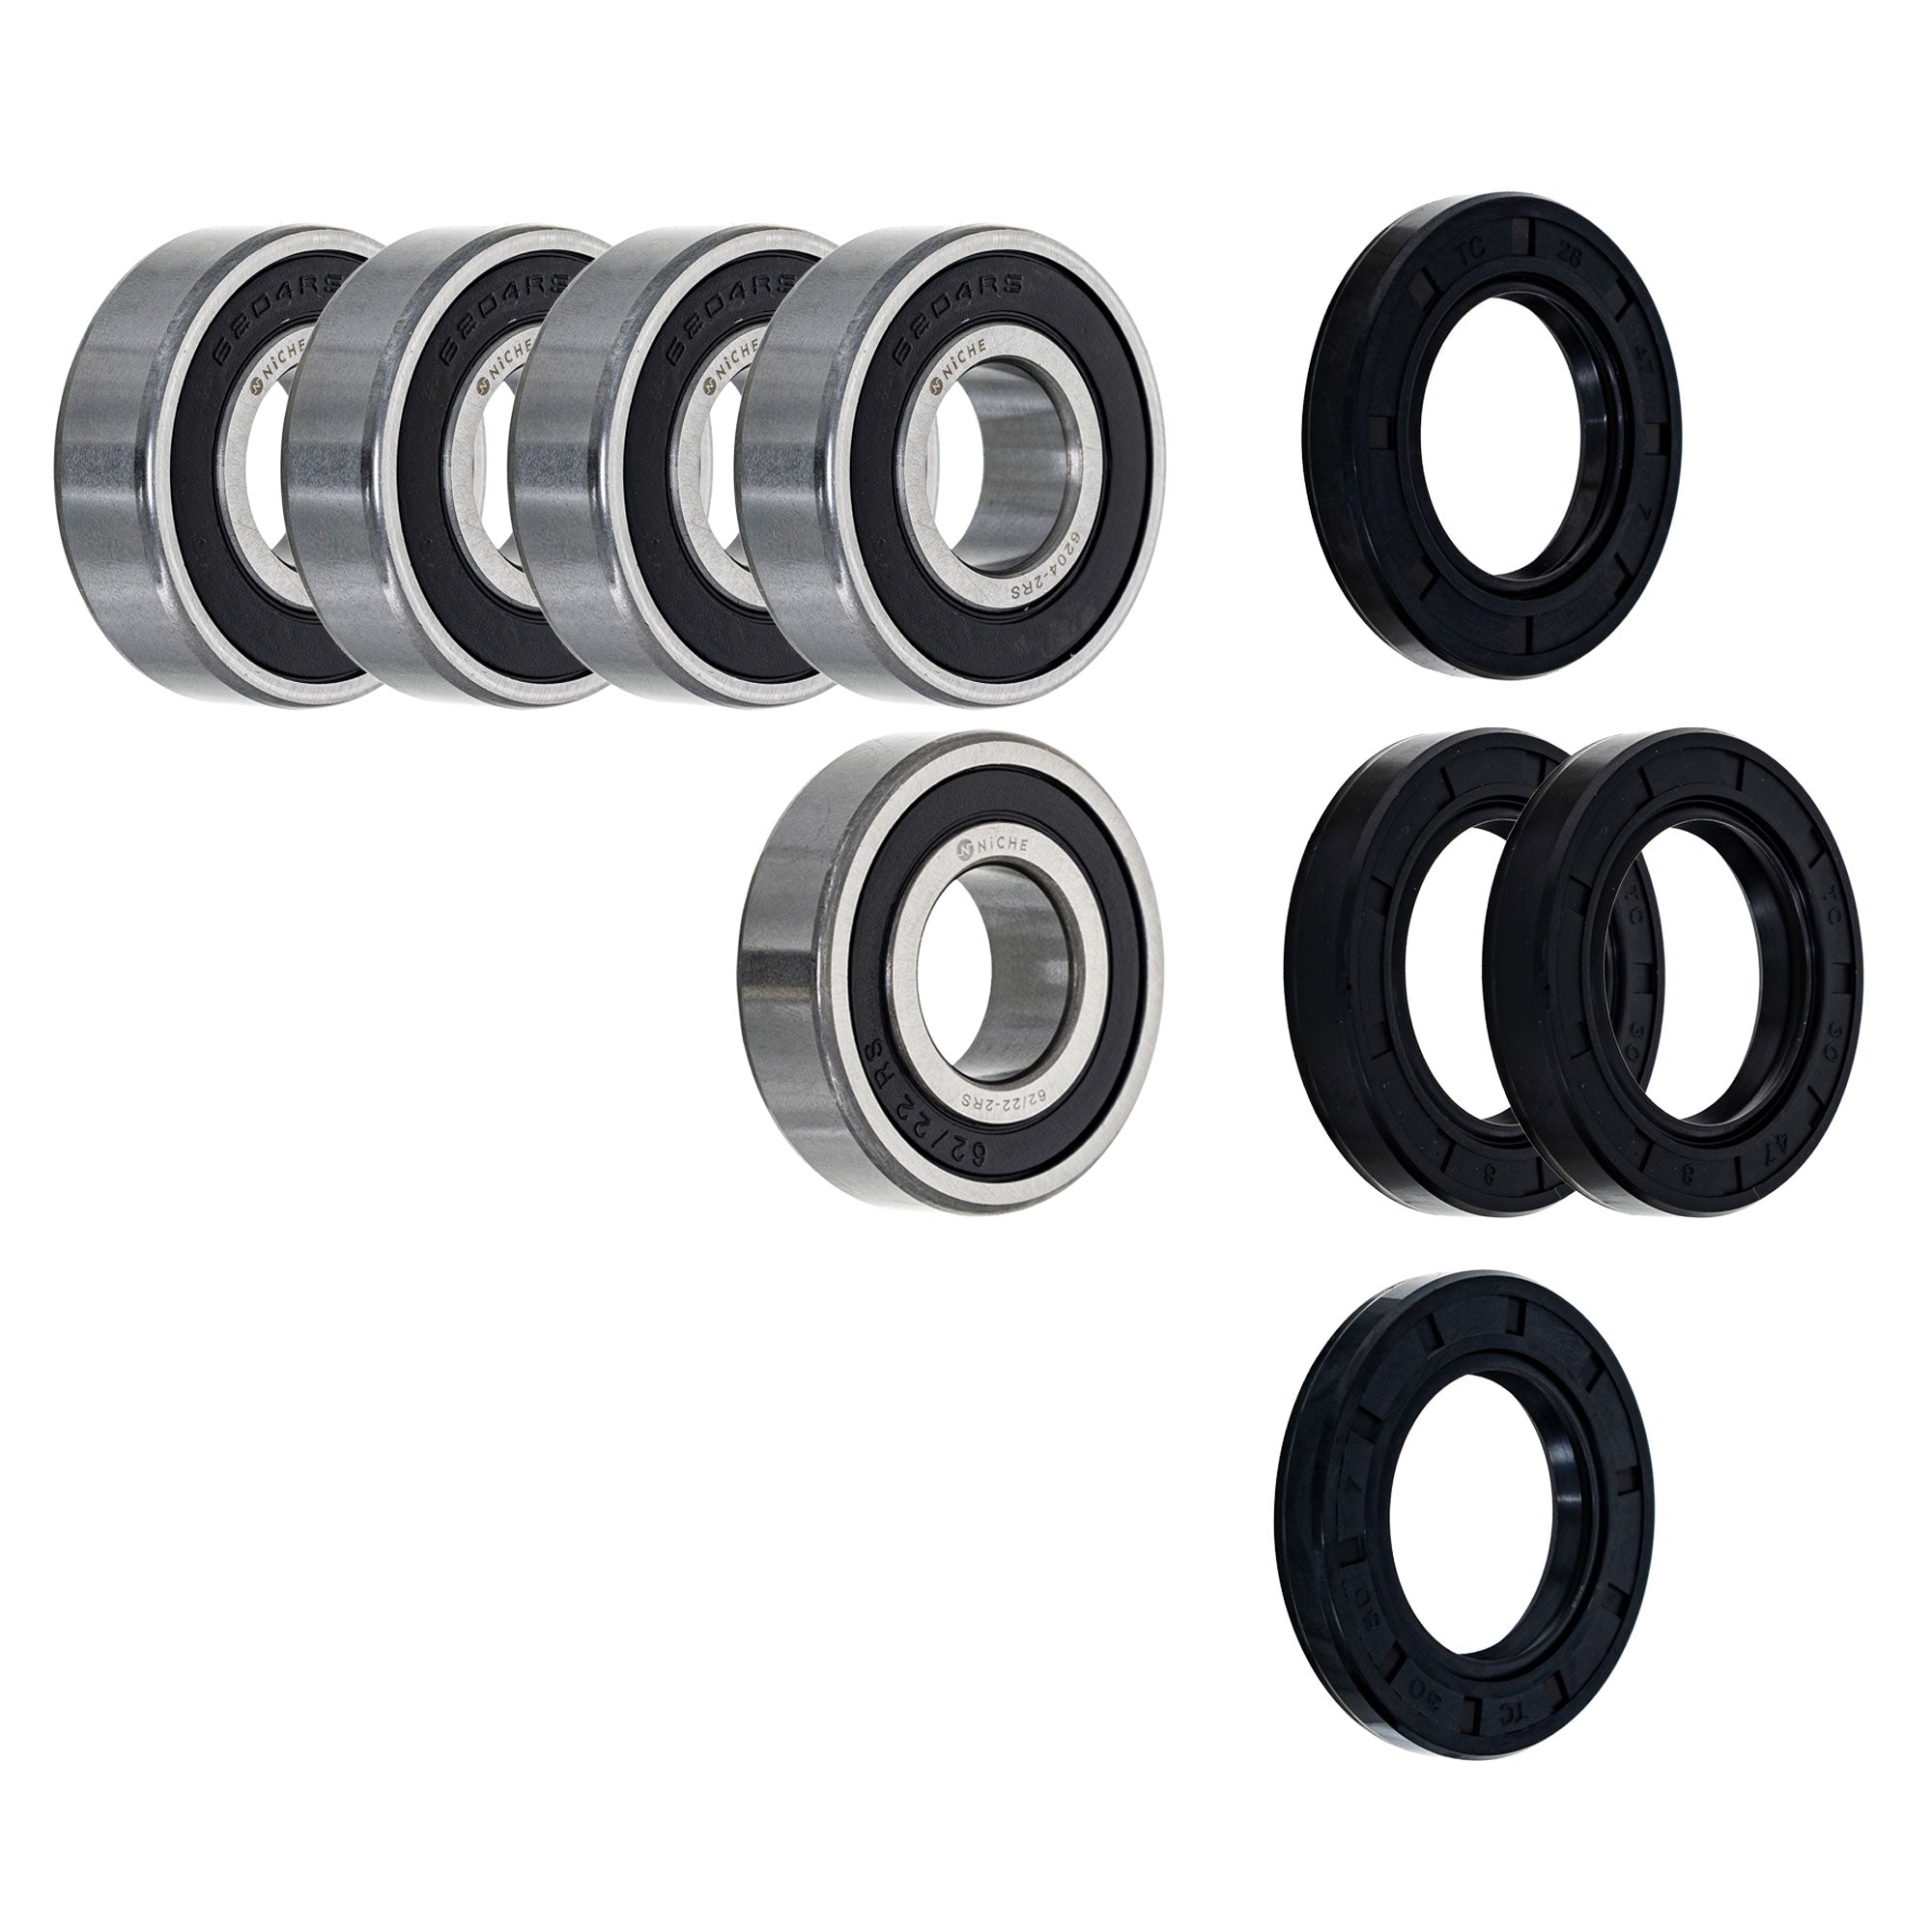 Wheel Bearing Seal Kit for zOTHER Ref No Shadow NICHE MK1008518